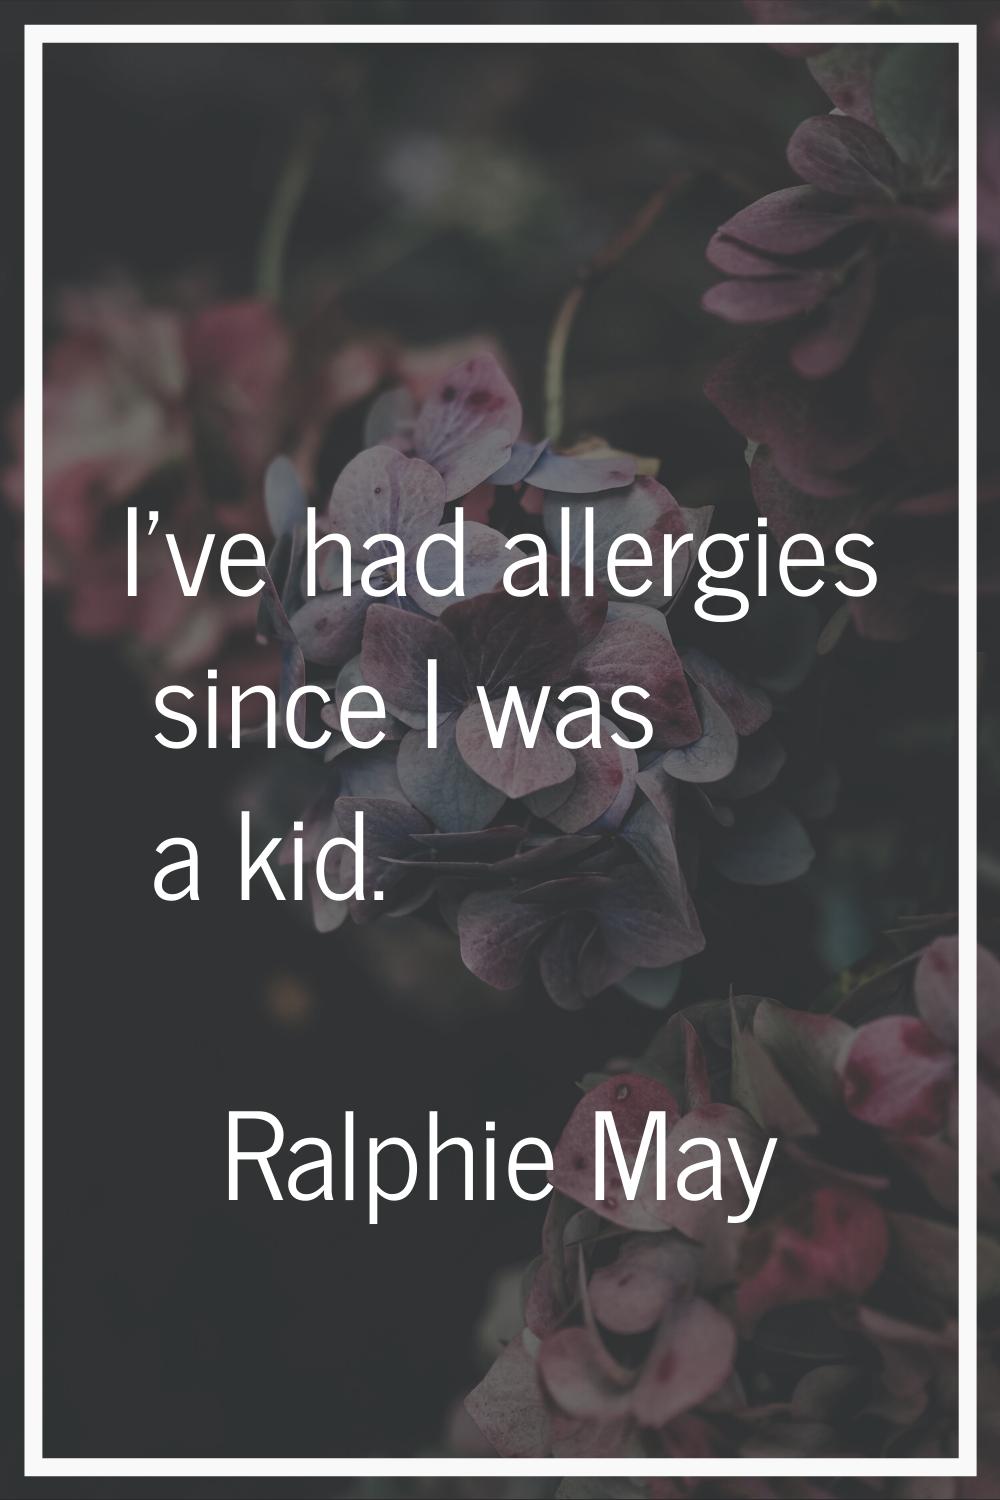 I've had allergies since I was a kid.